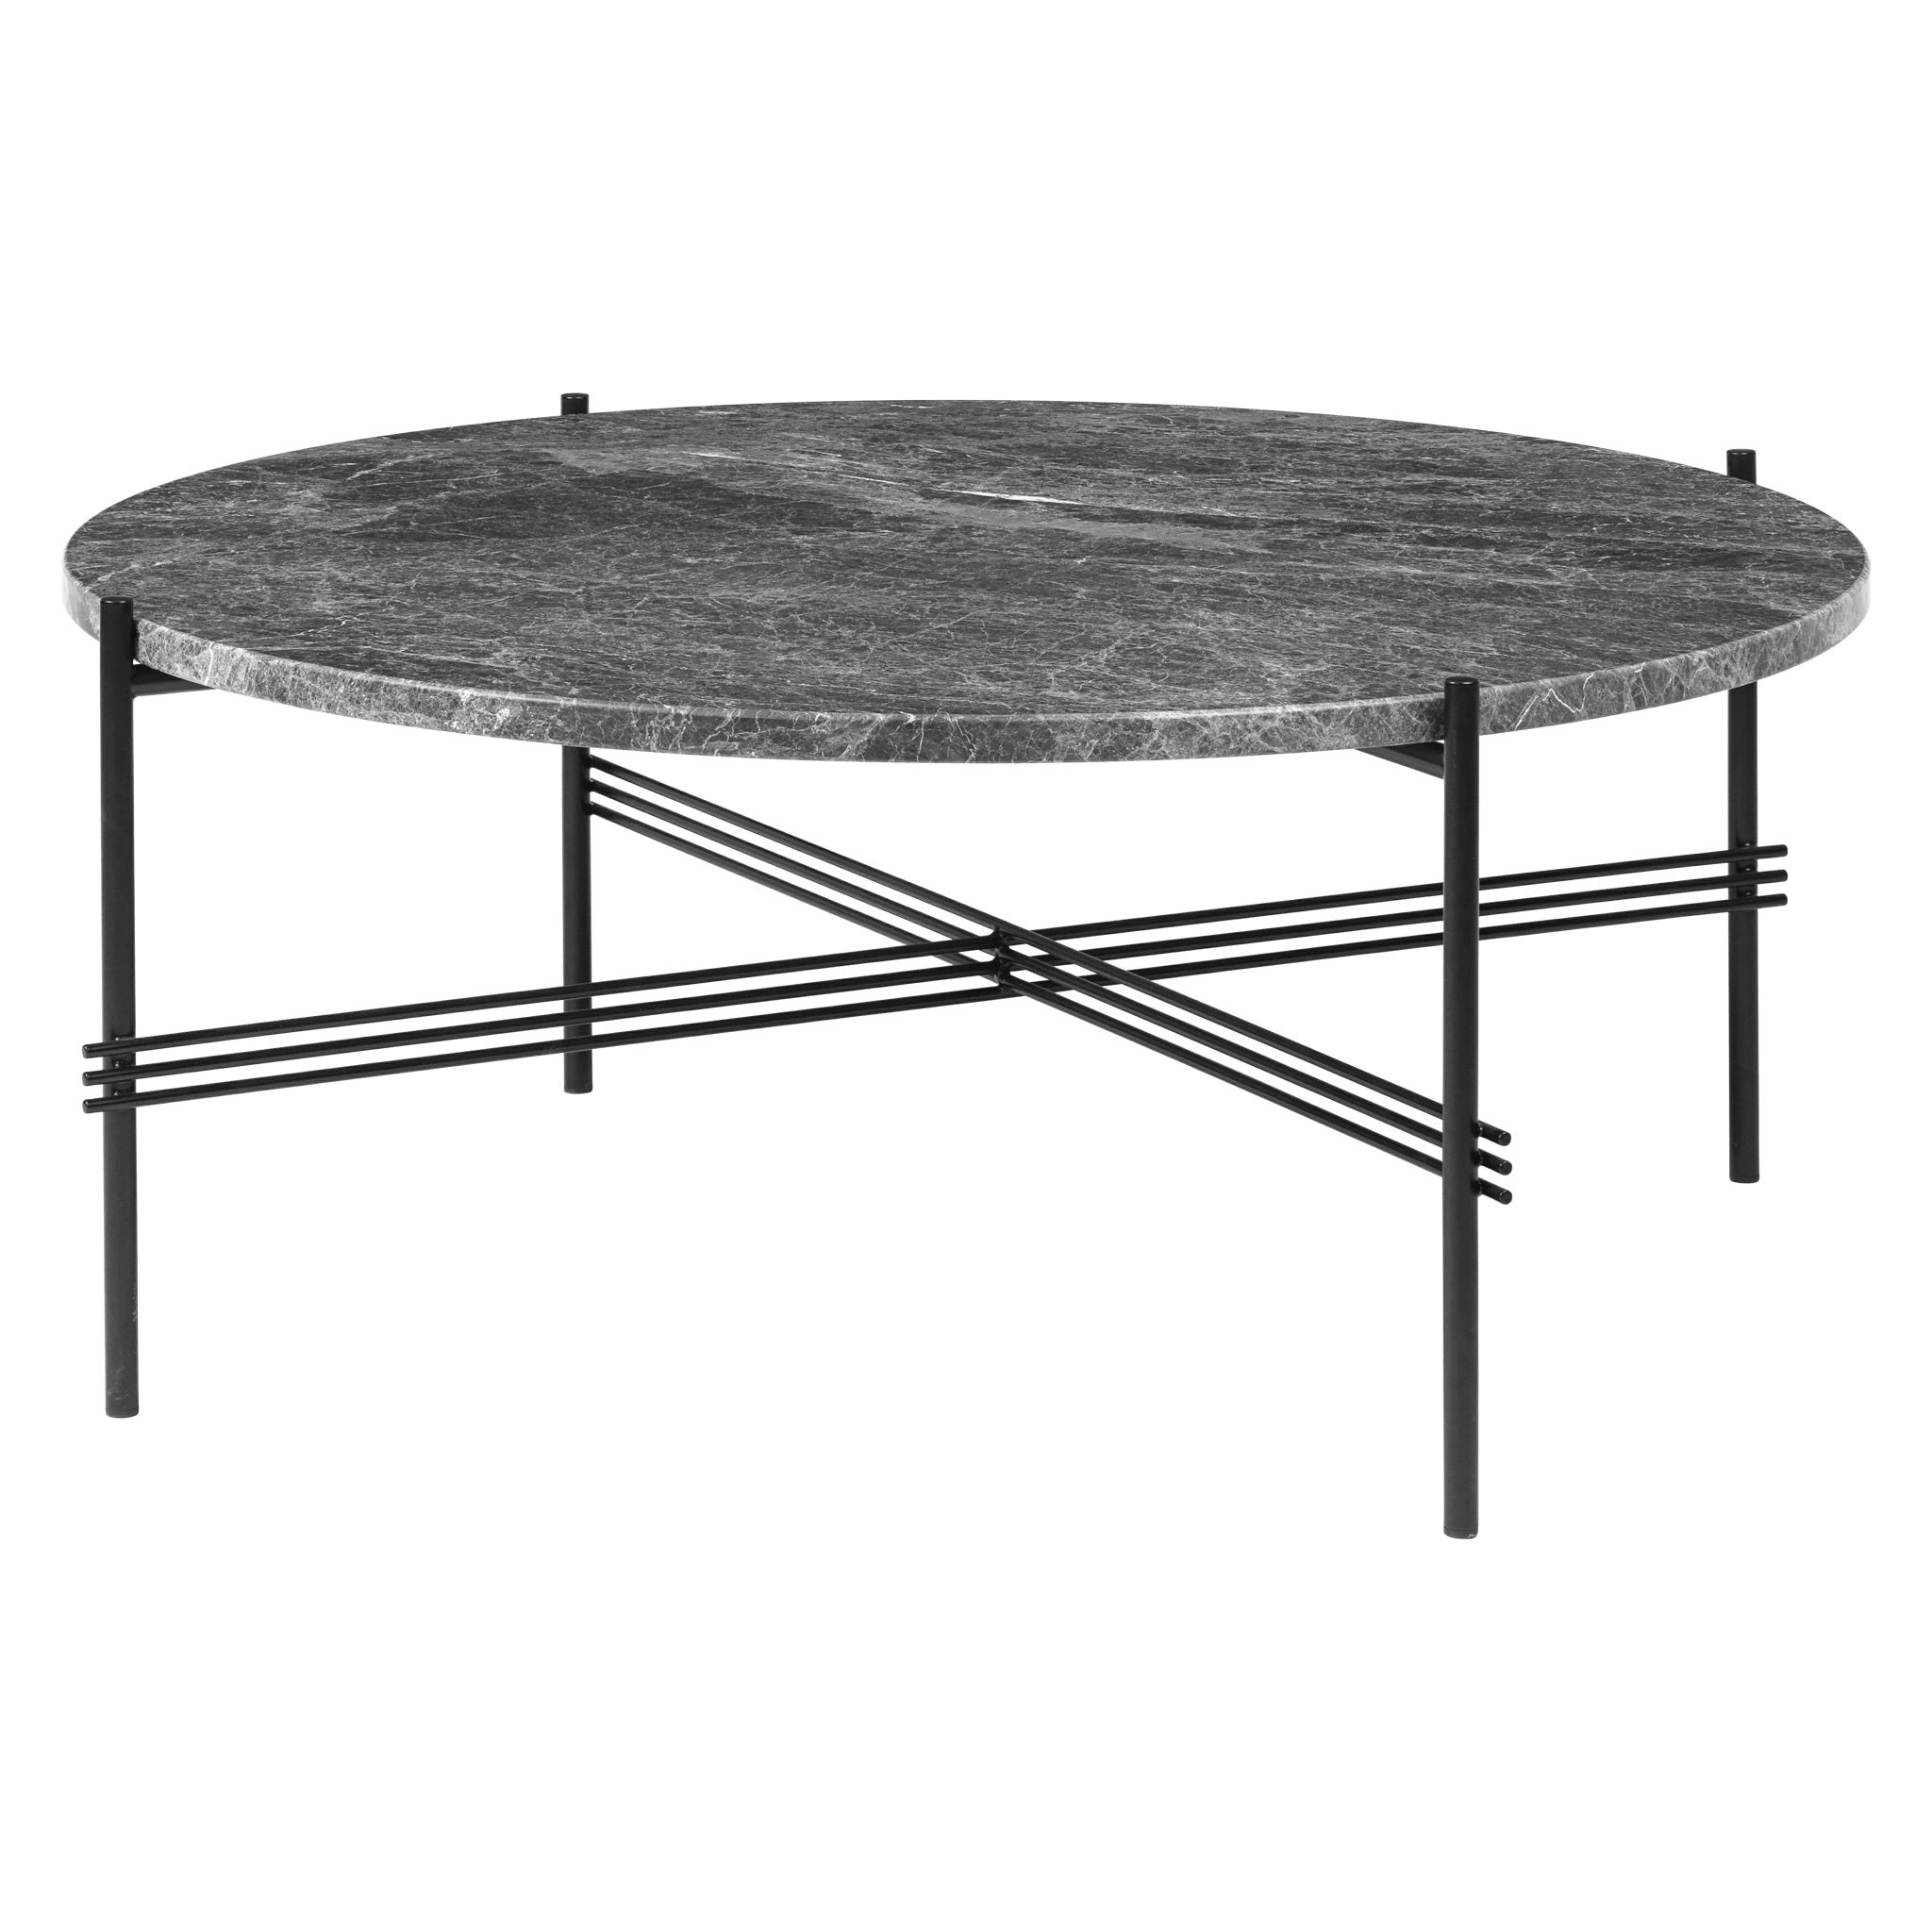 TS Table Marble by Gubi